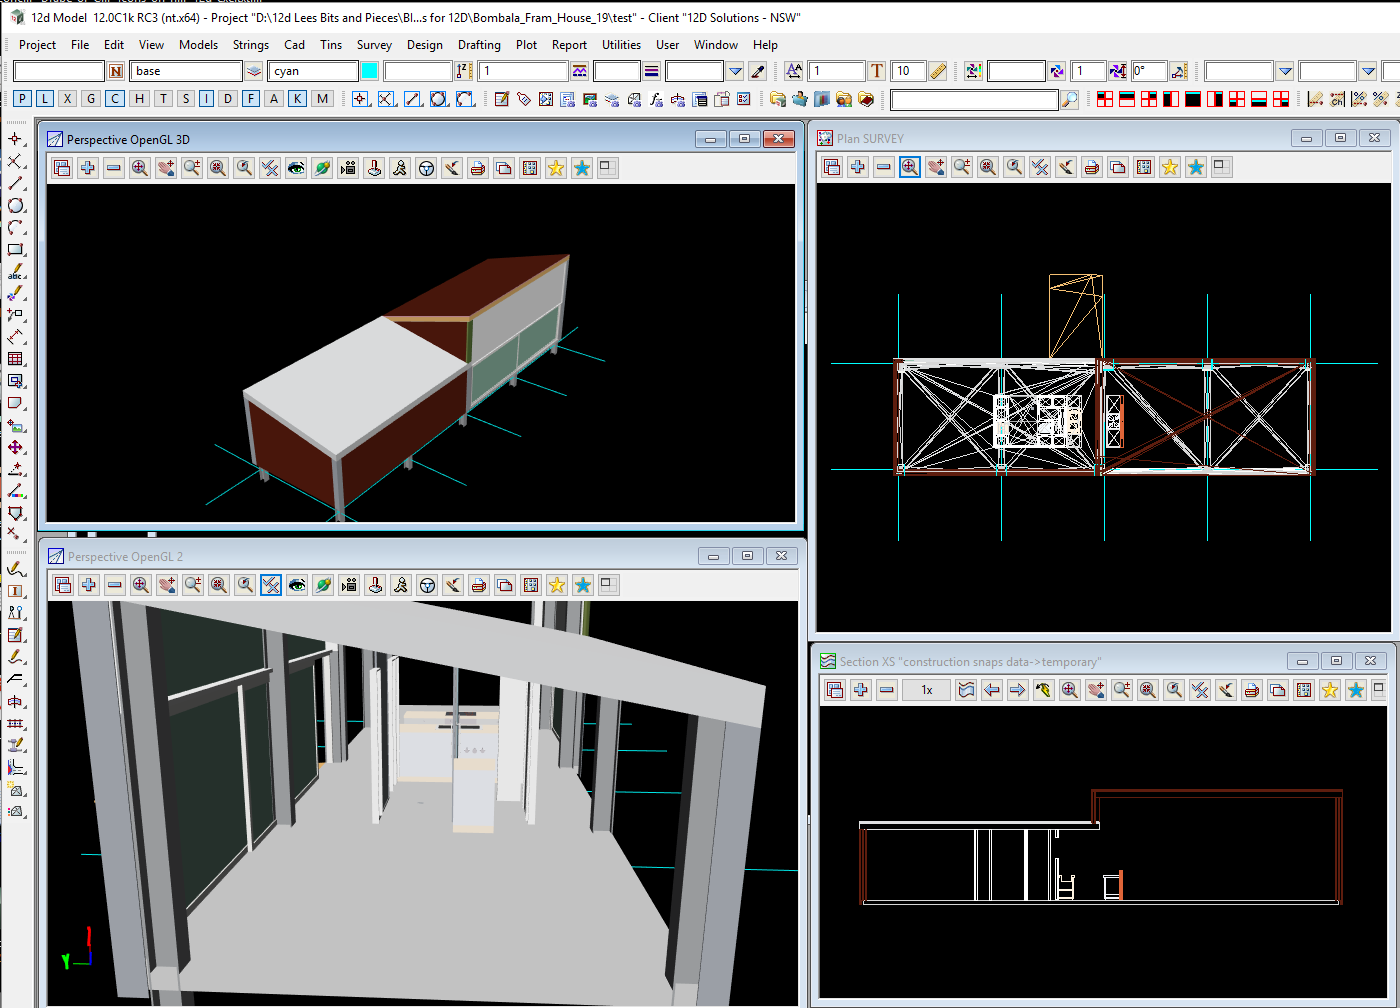 Data loaded into 12d Model from ArchiCAD IFC files